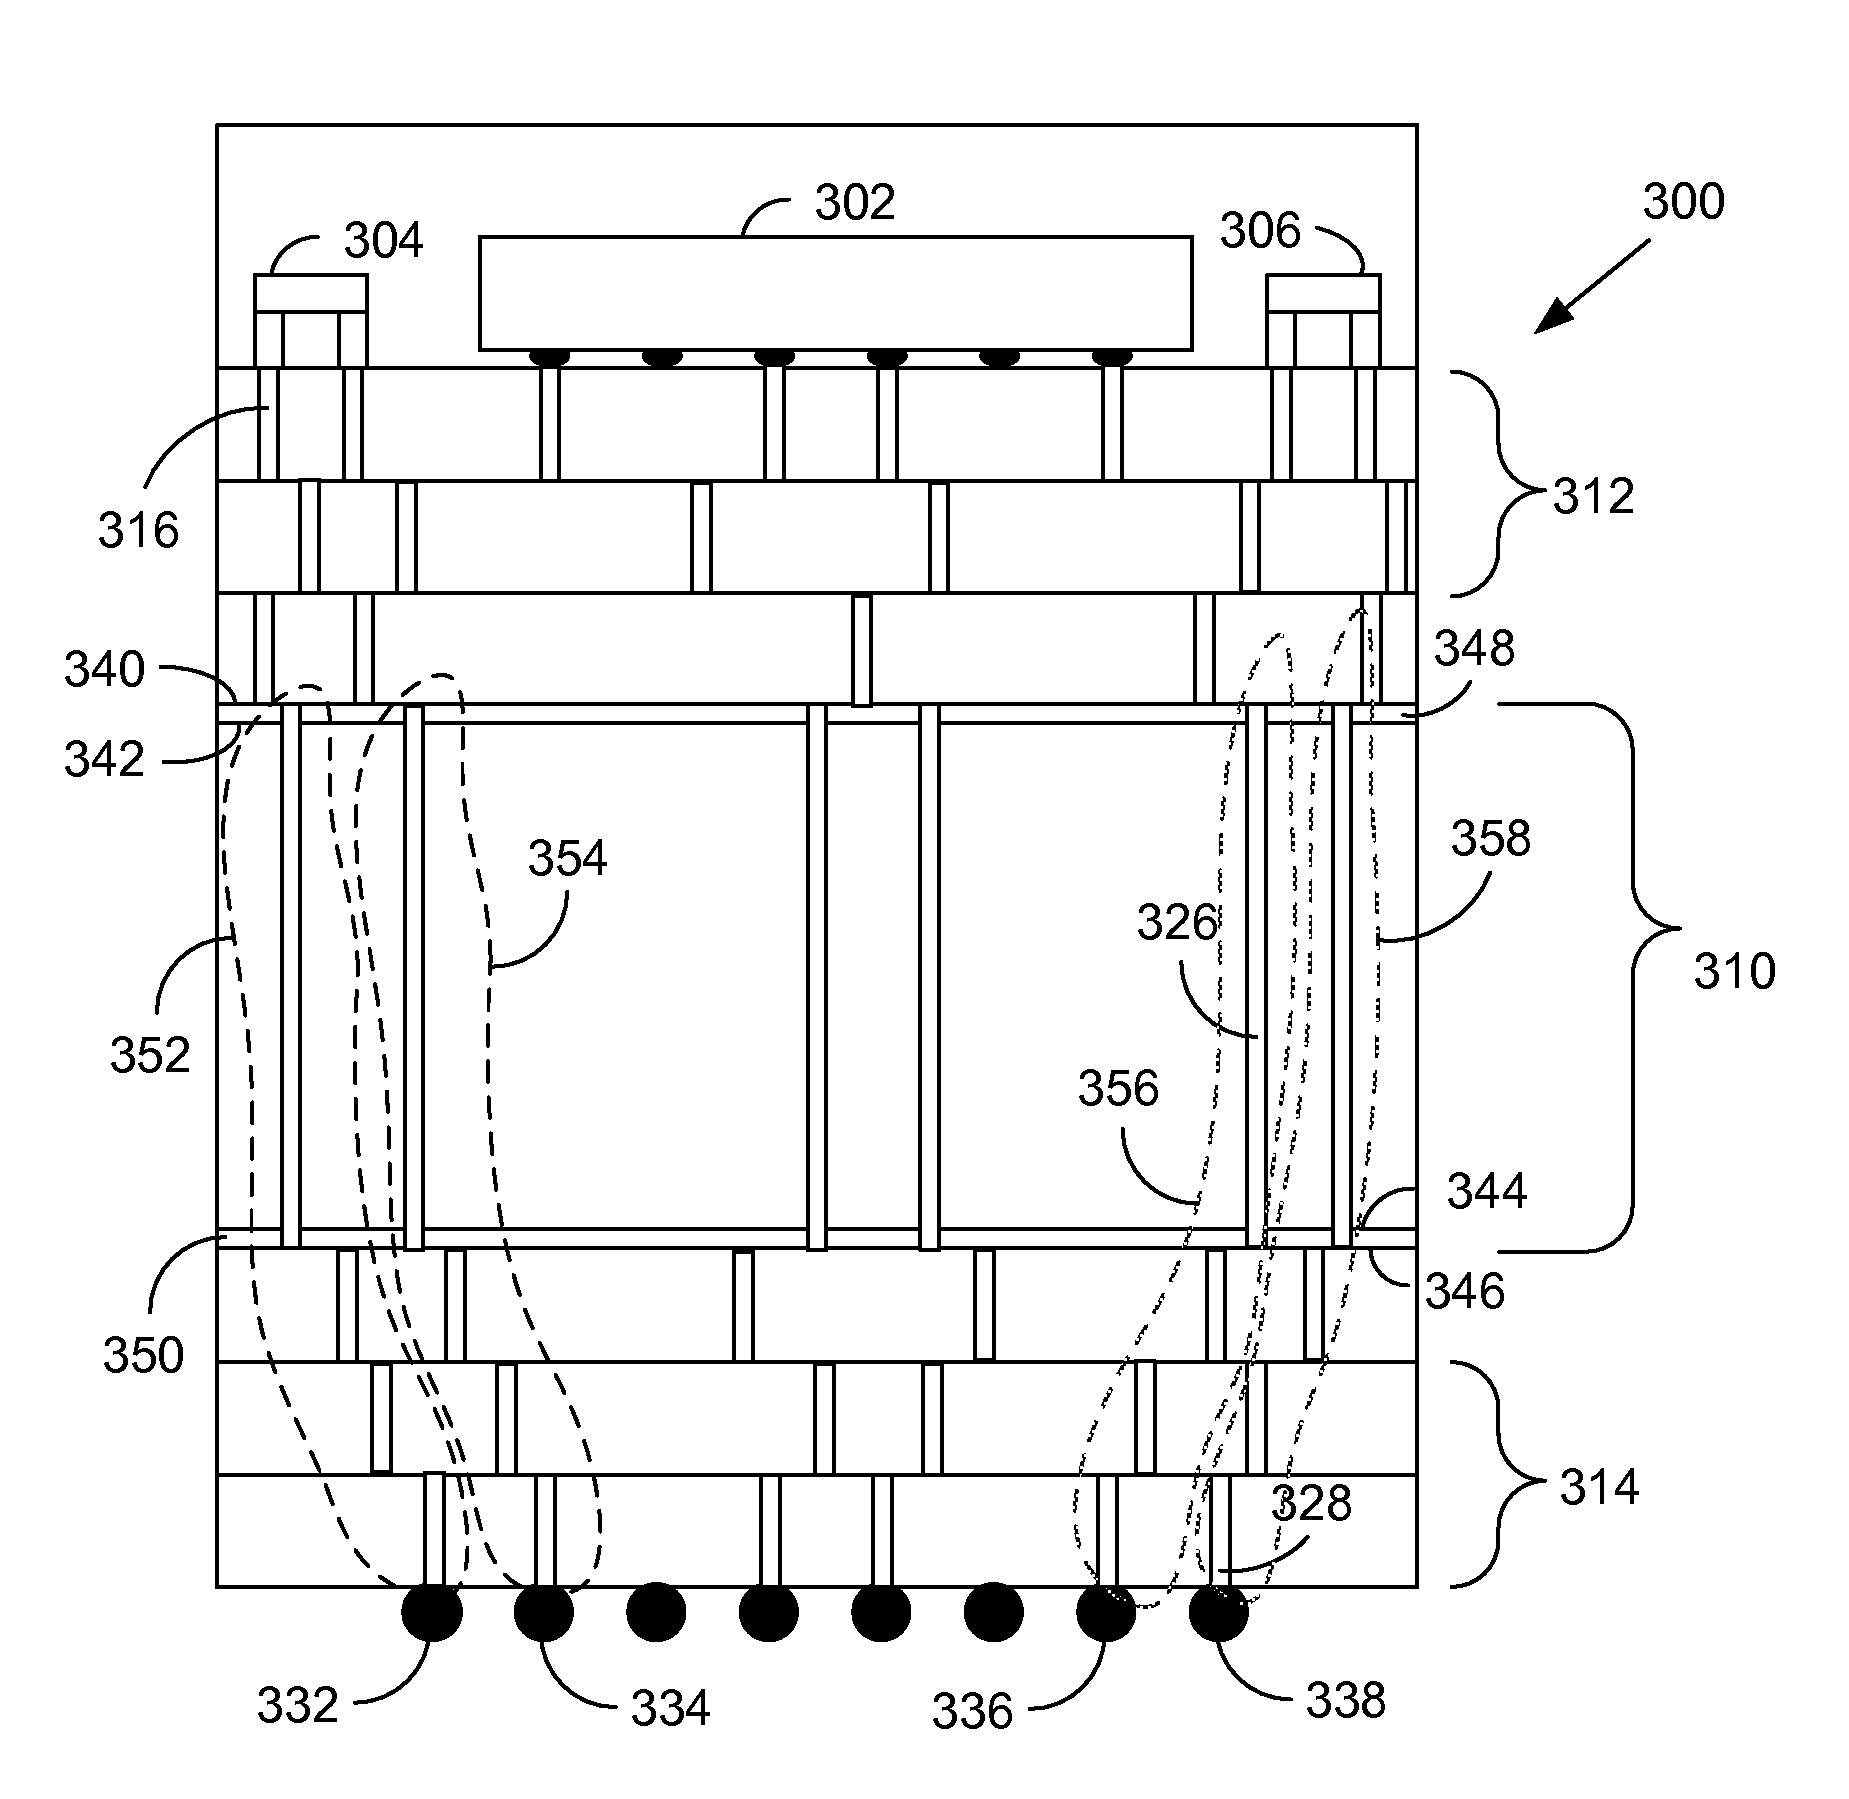 Method and apparatus for a power distribution system